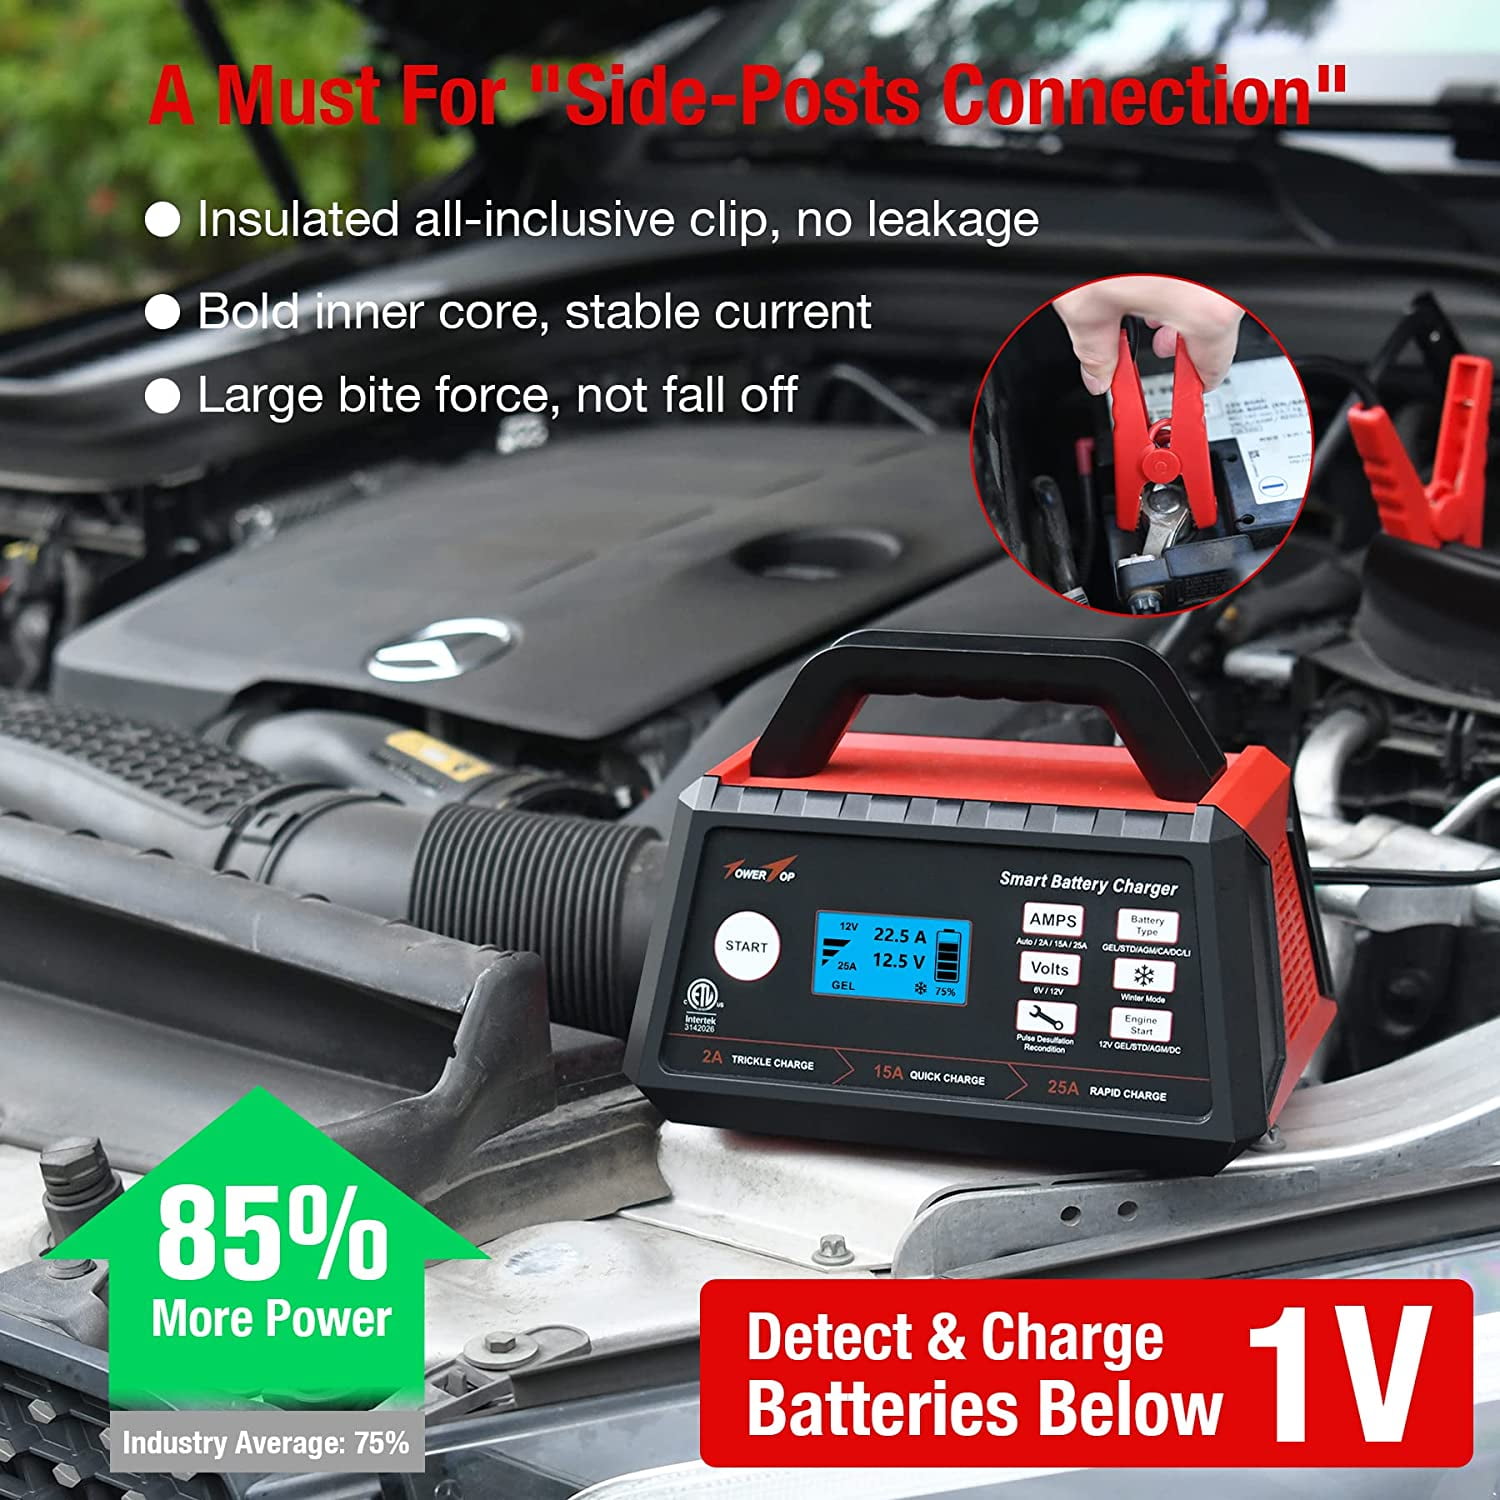  TowerTop 3/15/25 Amp Car Battery Charger, 12V Fully Automatic  Smart Battery Maintainer with Engine Start, Auto Desulfator, Battery  Repair, for All Lead-Acid and LiFePO4 Batteries : Automotive